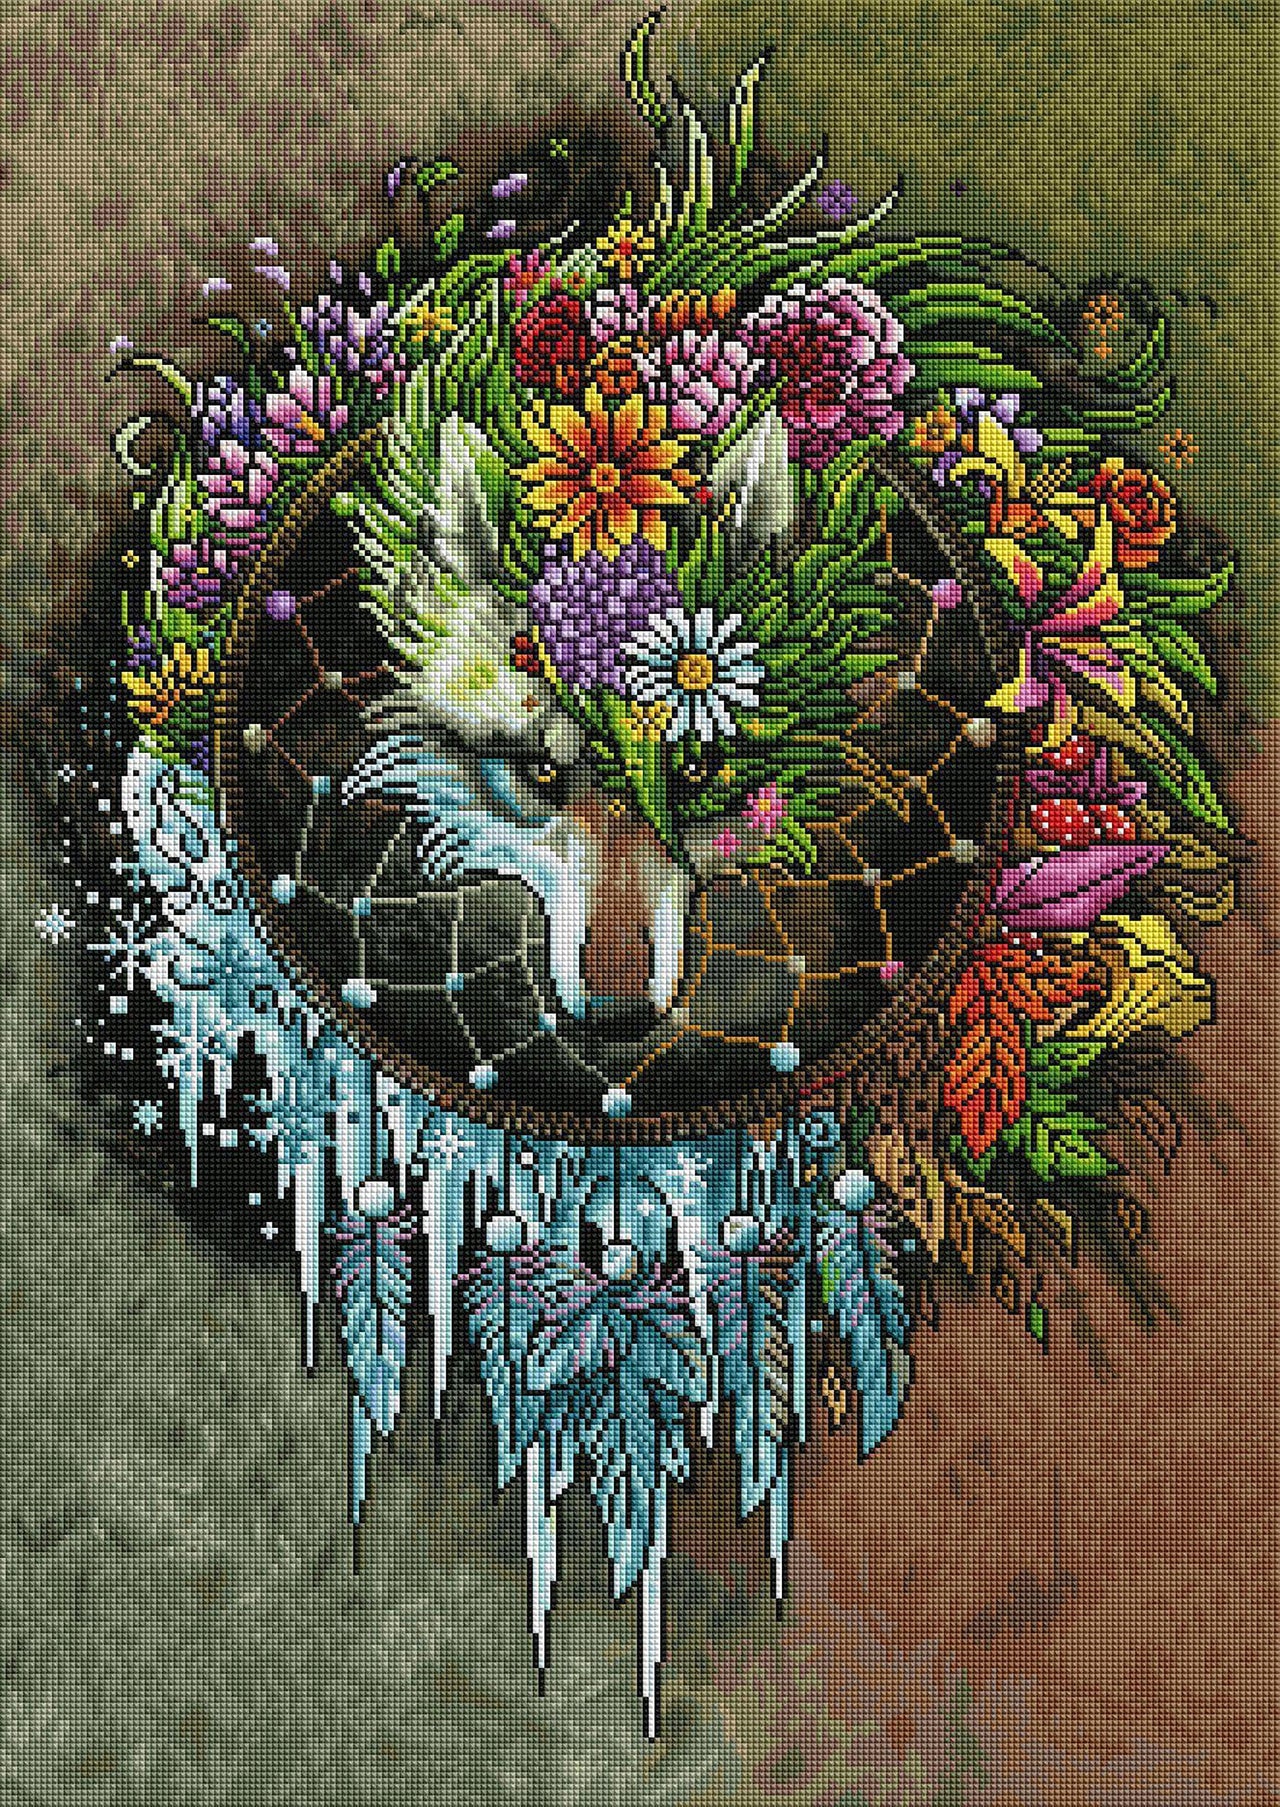 Diamond Painting Wolf Seasons Dreamcatcher 22" x 31" (56cm x 79cm) / Square with 63 Colors and 3 ABs / 68,952